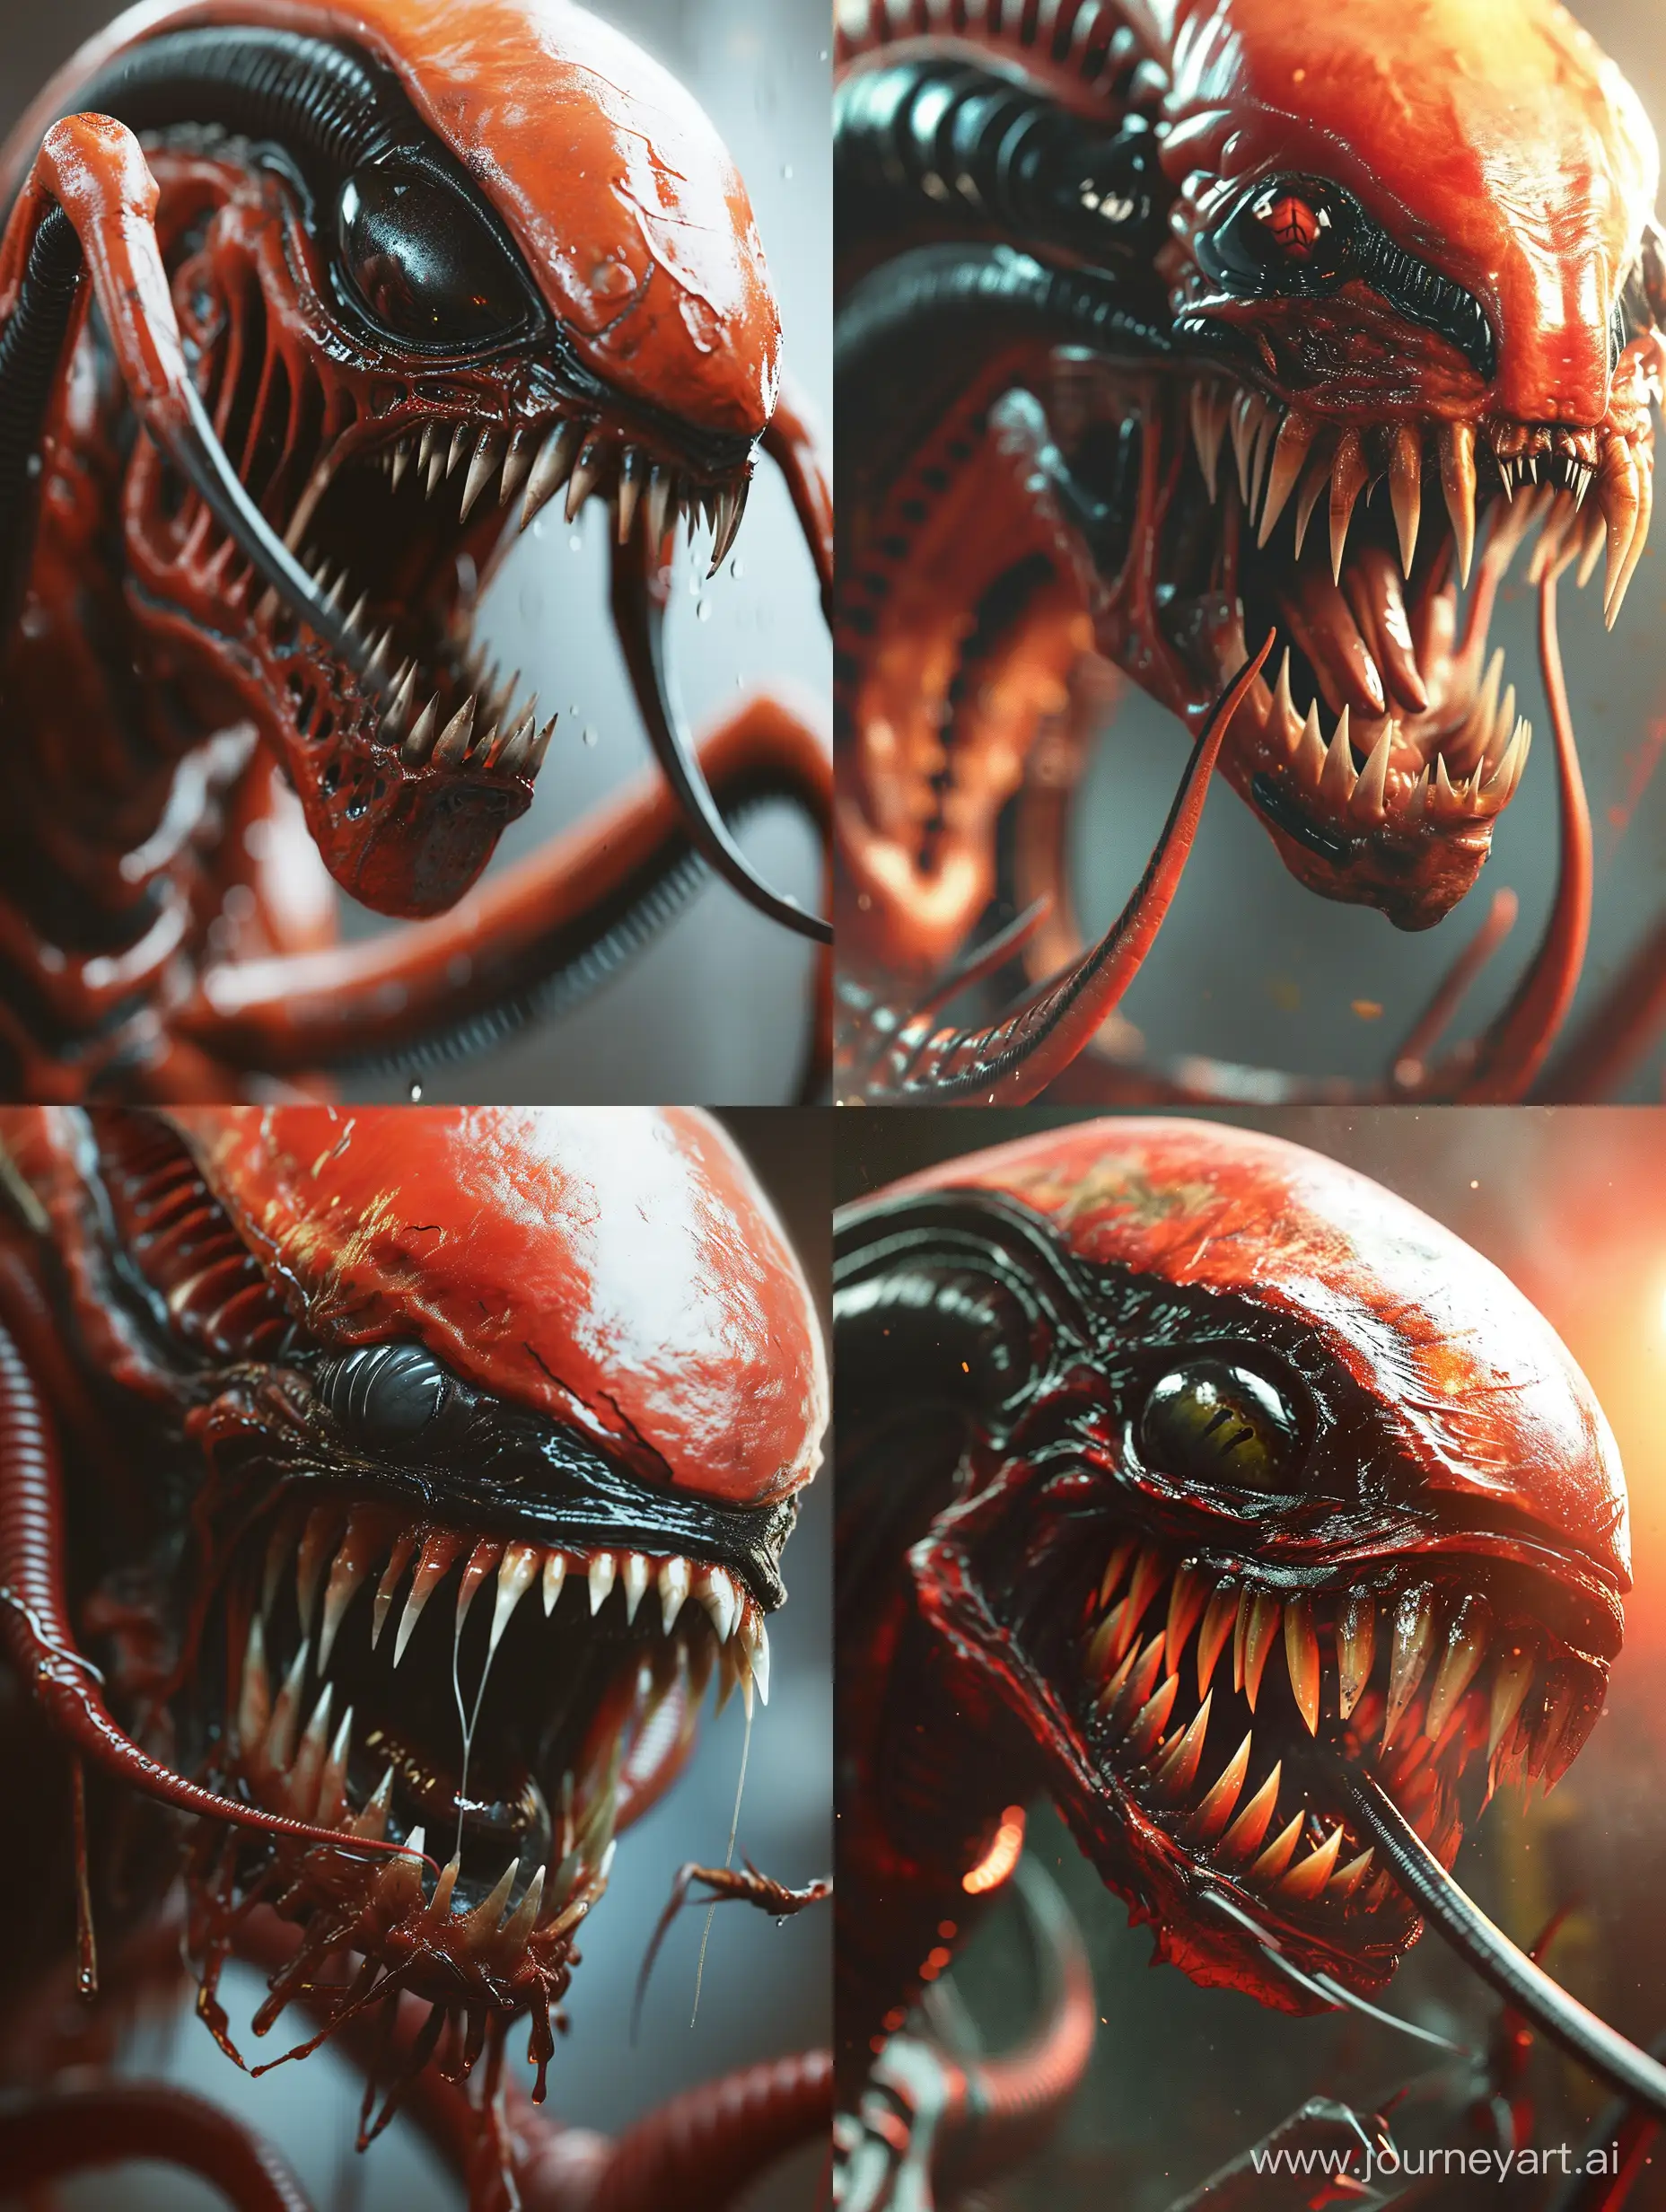 The image features a close-up of a red and black alien creature with large teeth and eyes. It has long sharp teeth and is shown in a 3D illustration style.